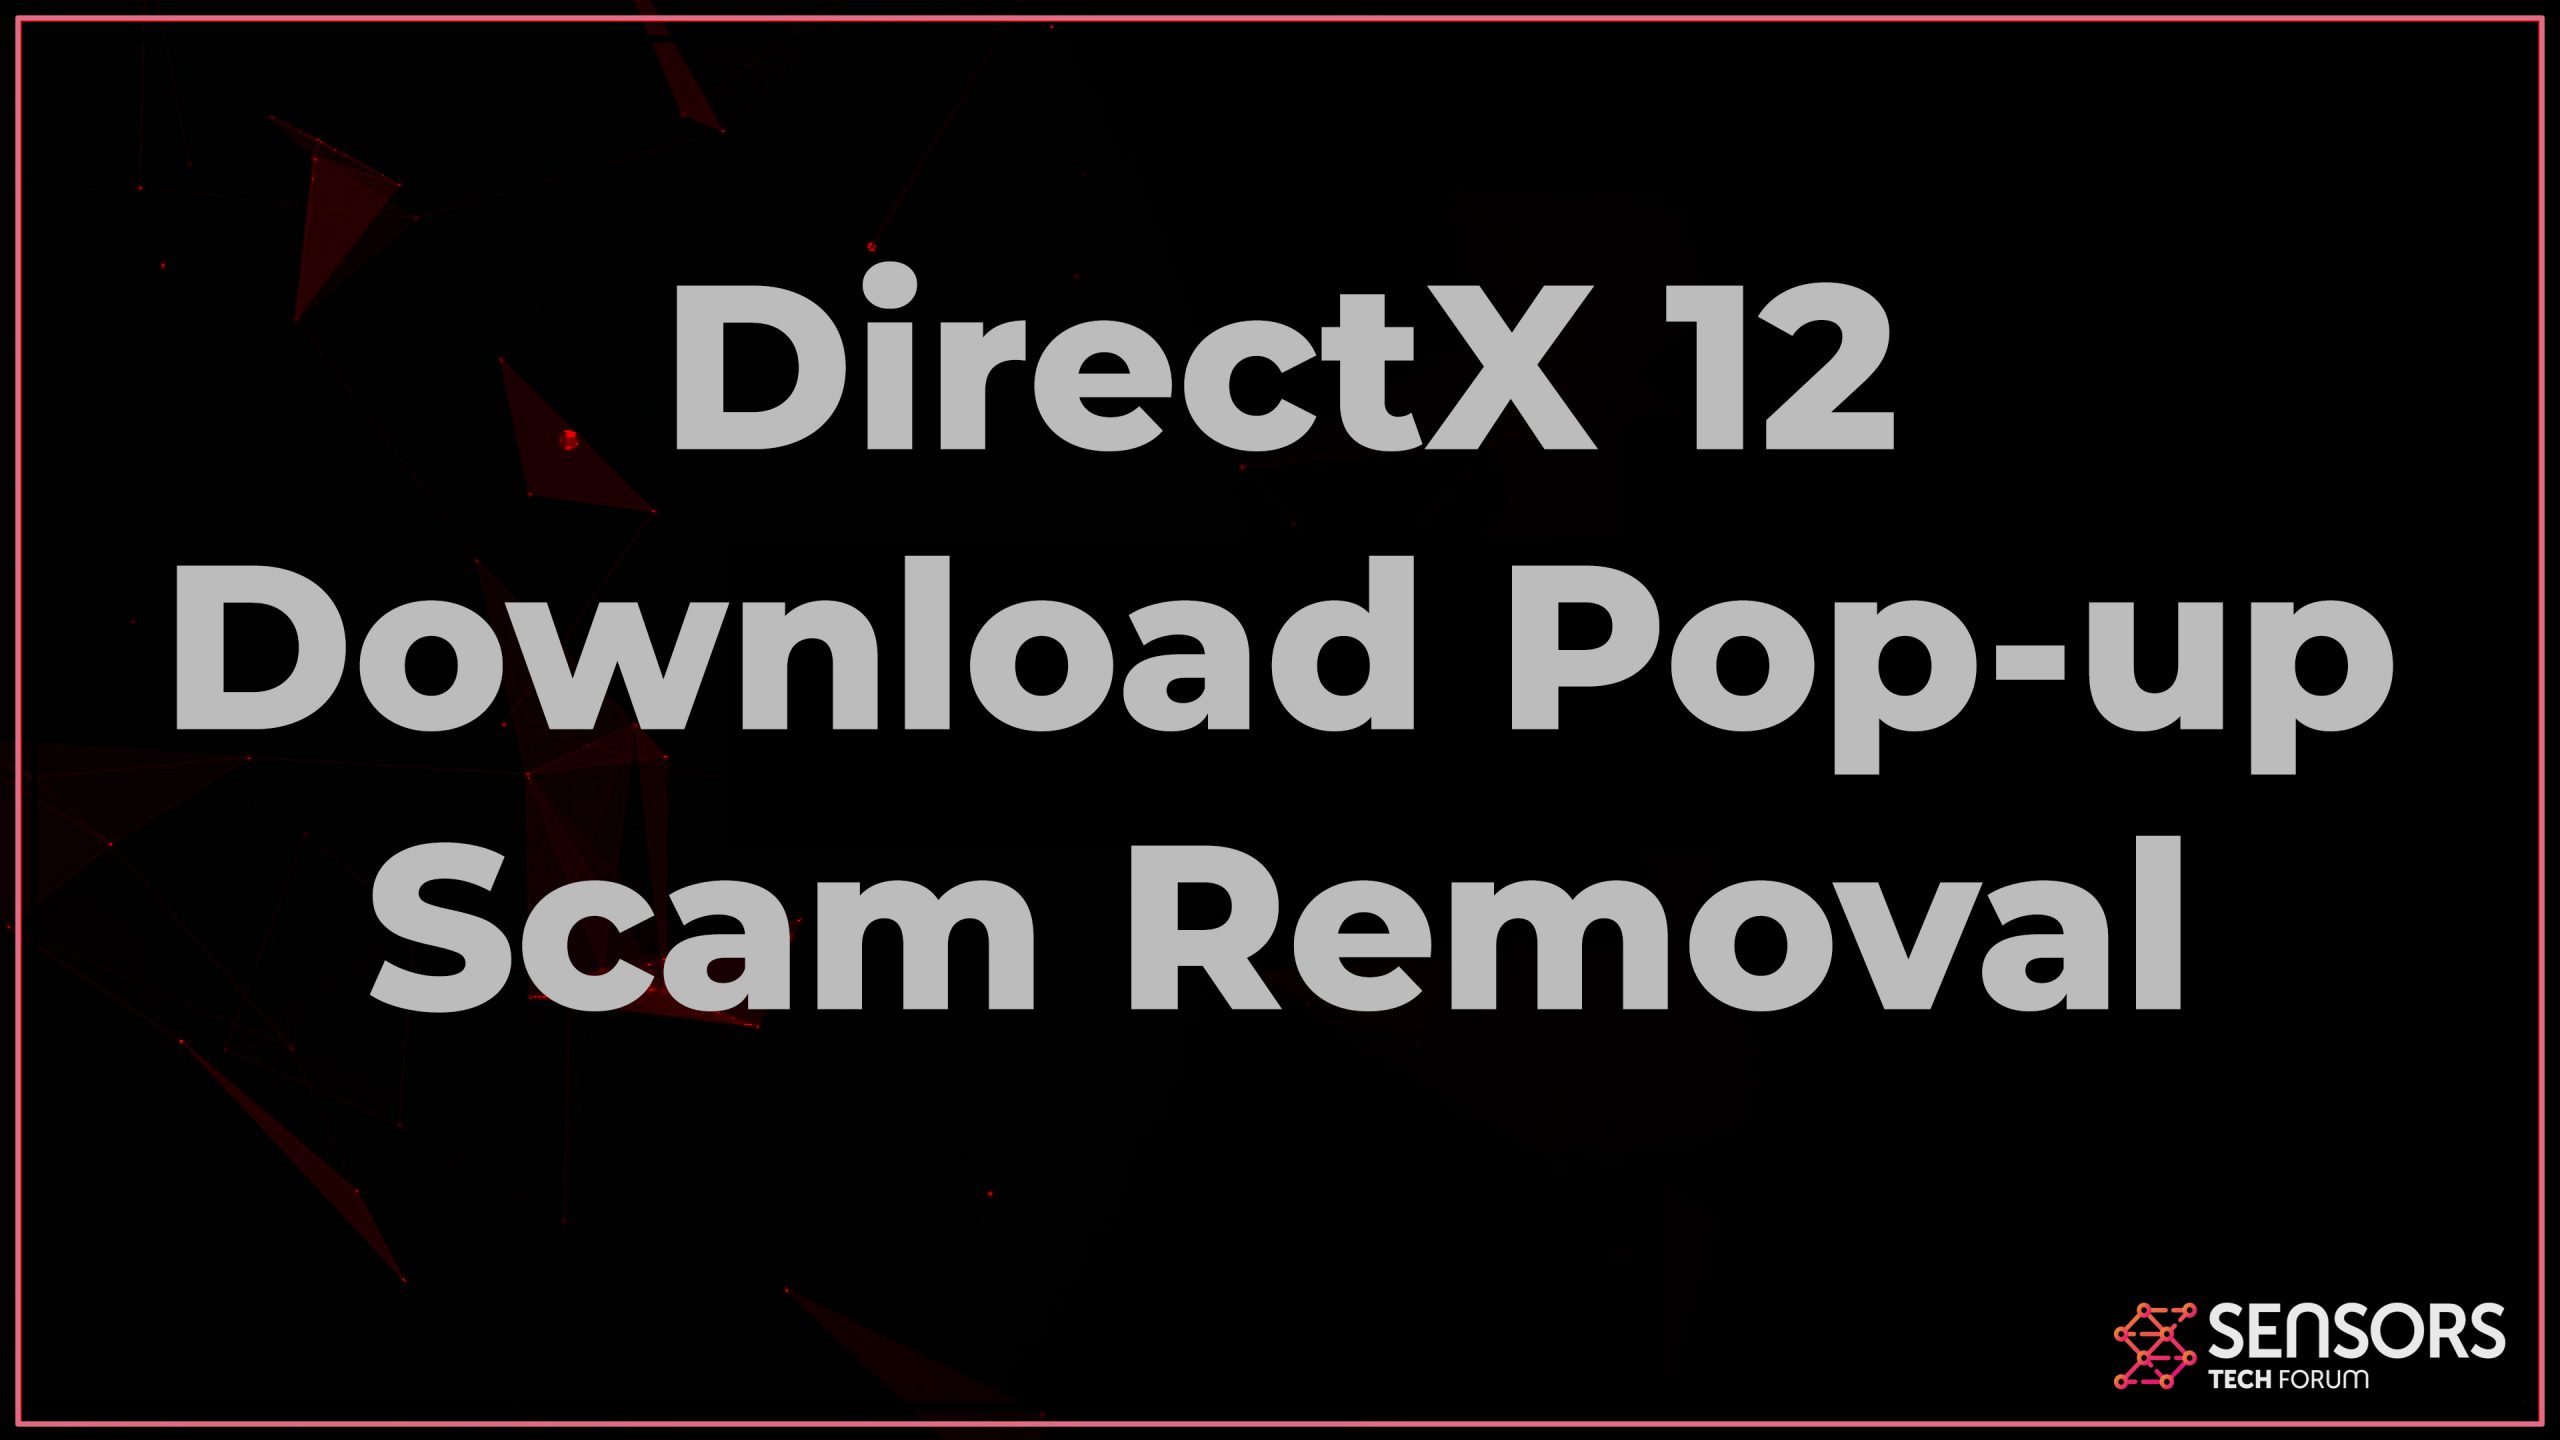 Directx 12 Download Scam Pop Up Removal Guide Free Fix Steps